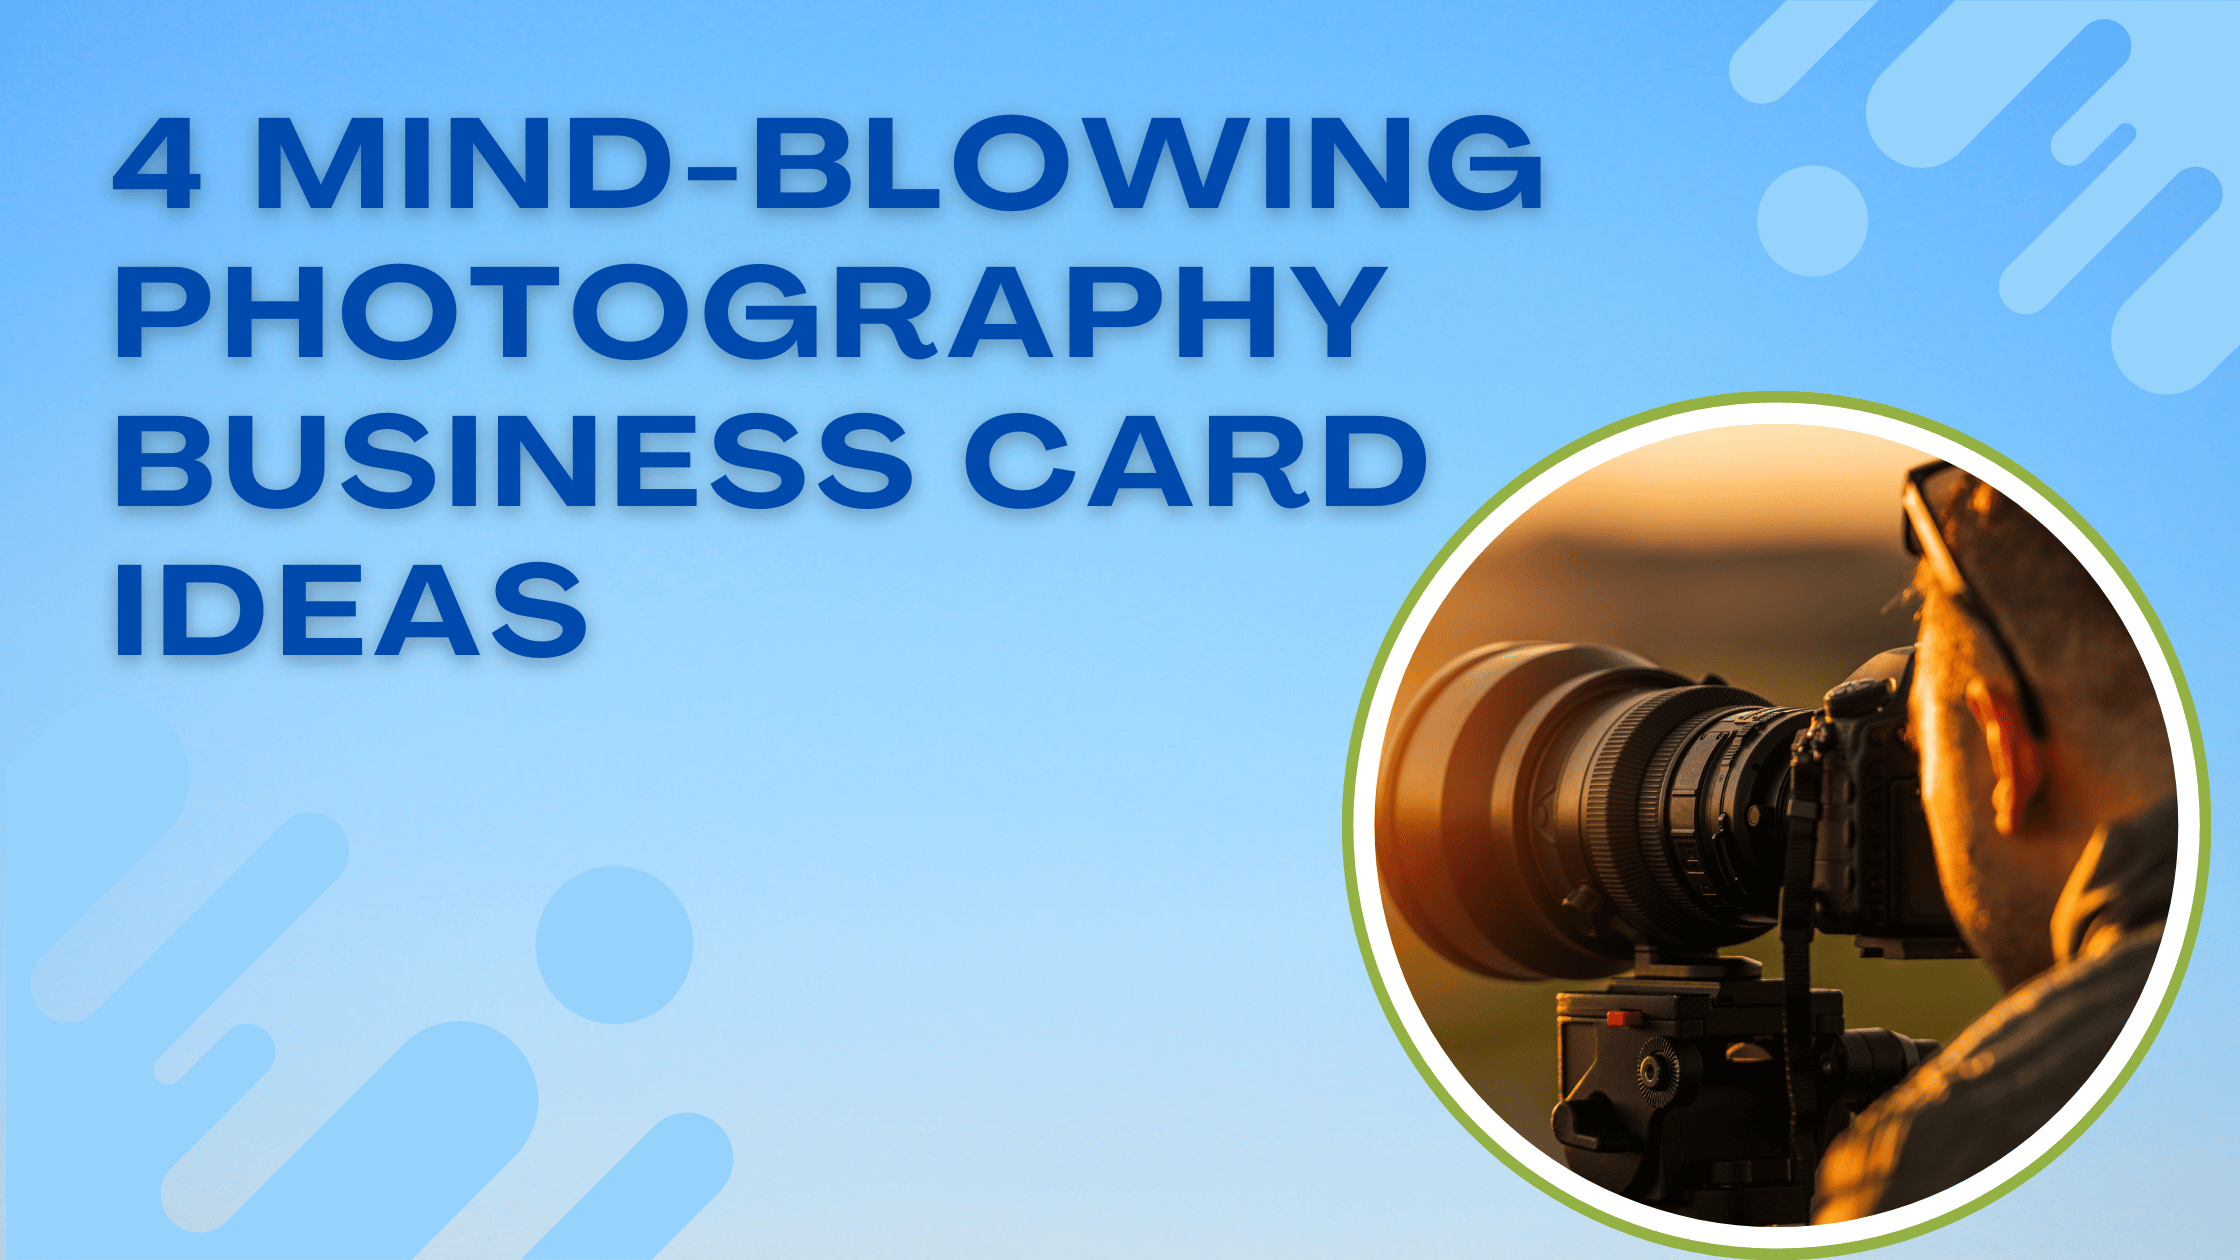 4 Mind-blowing Photography Business Card Ideas